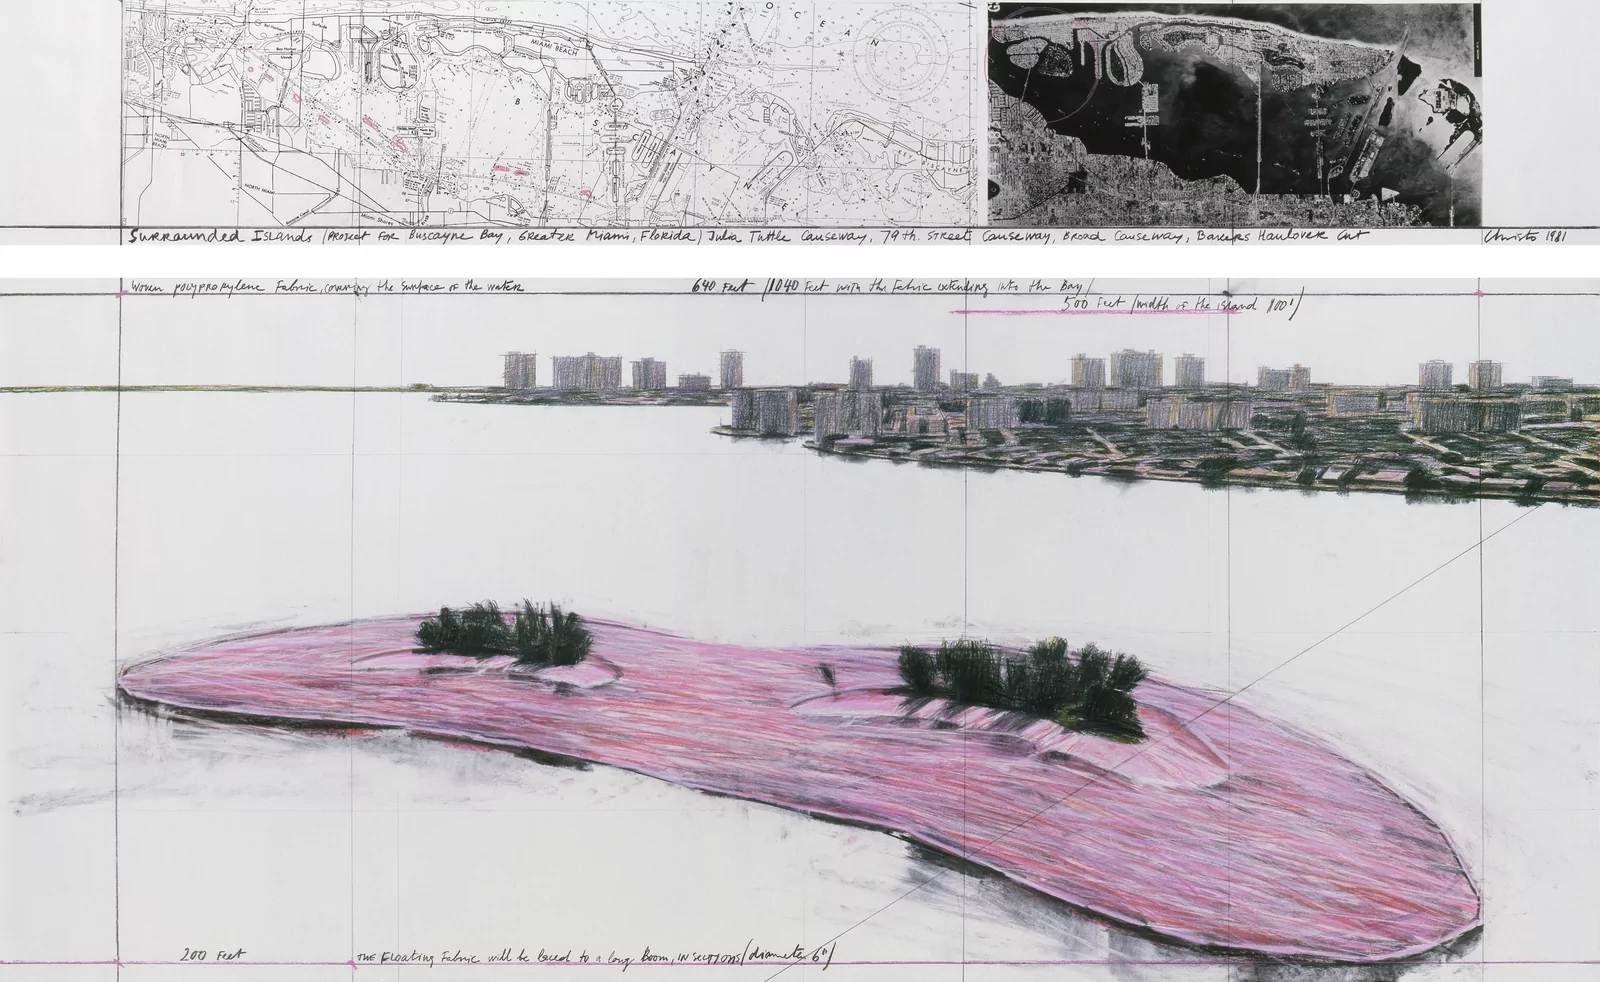 Christo Surrounded Islands (Project for Biscayne Bay, Greater Miami, Florida) Drawing 1981 in two parts Pencil, charcoal, pastel, wax crayon, aerial photograph, and map 38 x 244 cm and 106.6 x 244 cm (15 x 96 in and 42 x 96 in) — Property of the Estate of Christo V. Javacheff Photo: Wolfgang Volz © 1981 Christo and Jeanne-Claude Foundation